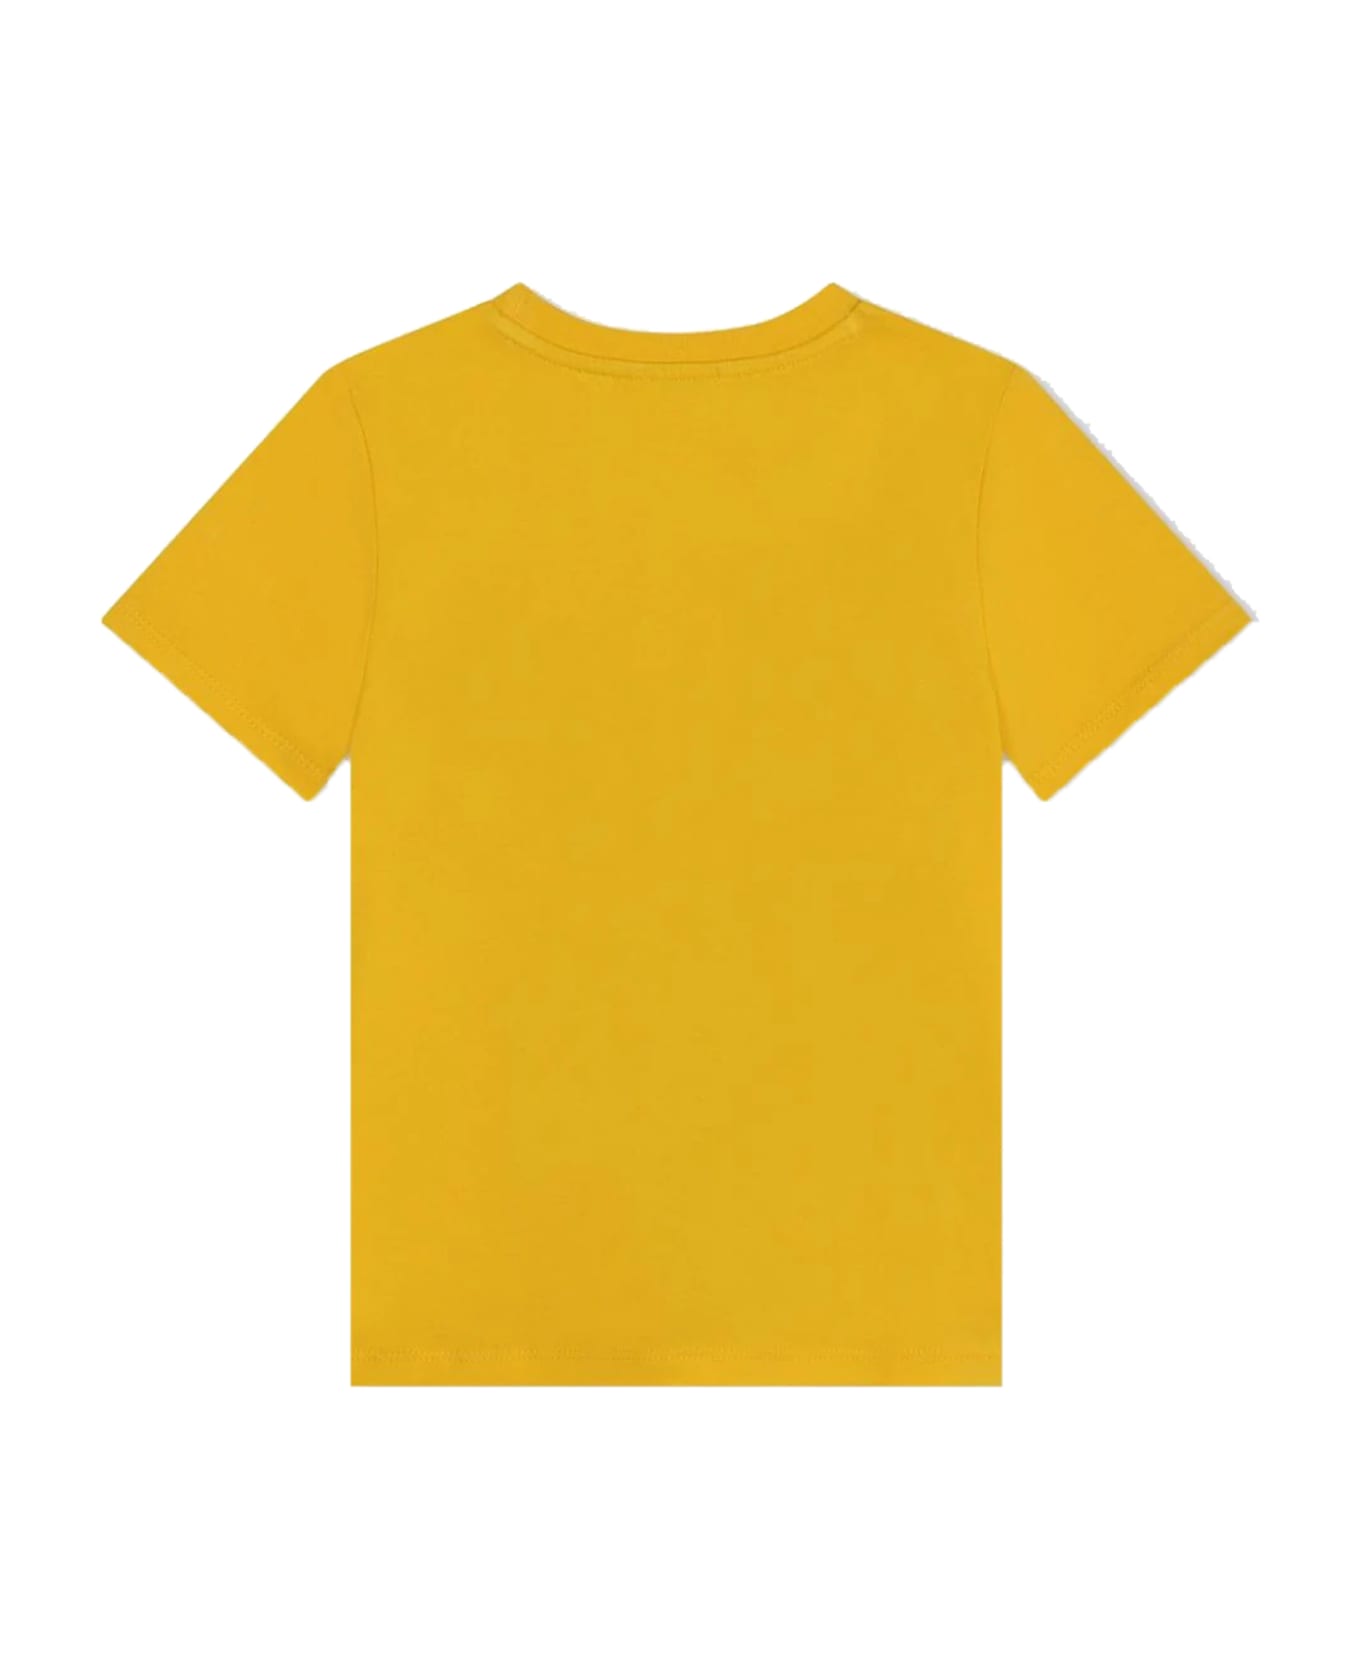 Kenzo T-shirt With Print - Yellow Tシャツ＆ポロシャツ